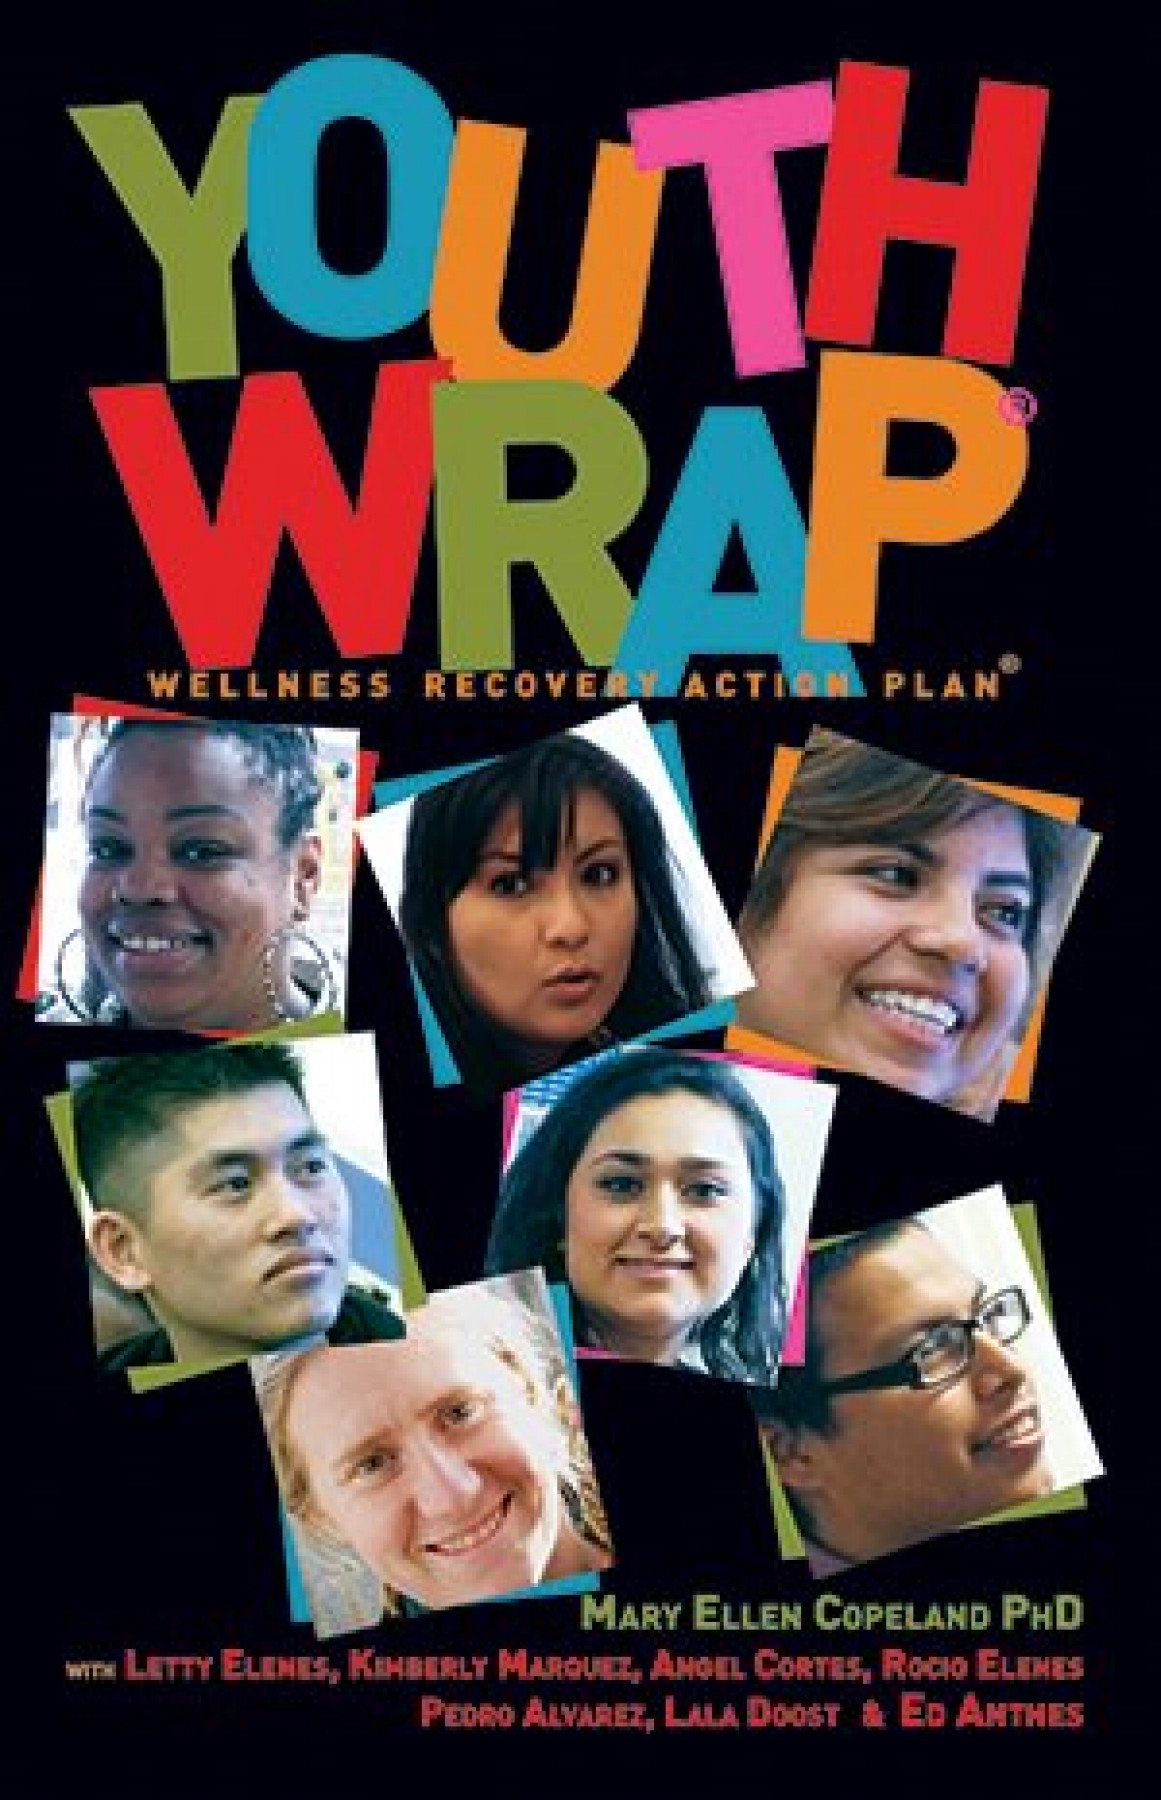 Youth WRAP: Wellness Recovery Action Plan